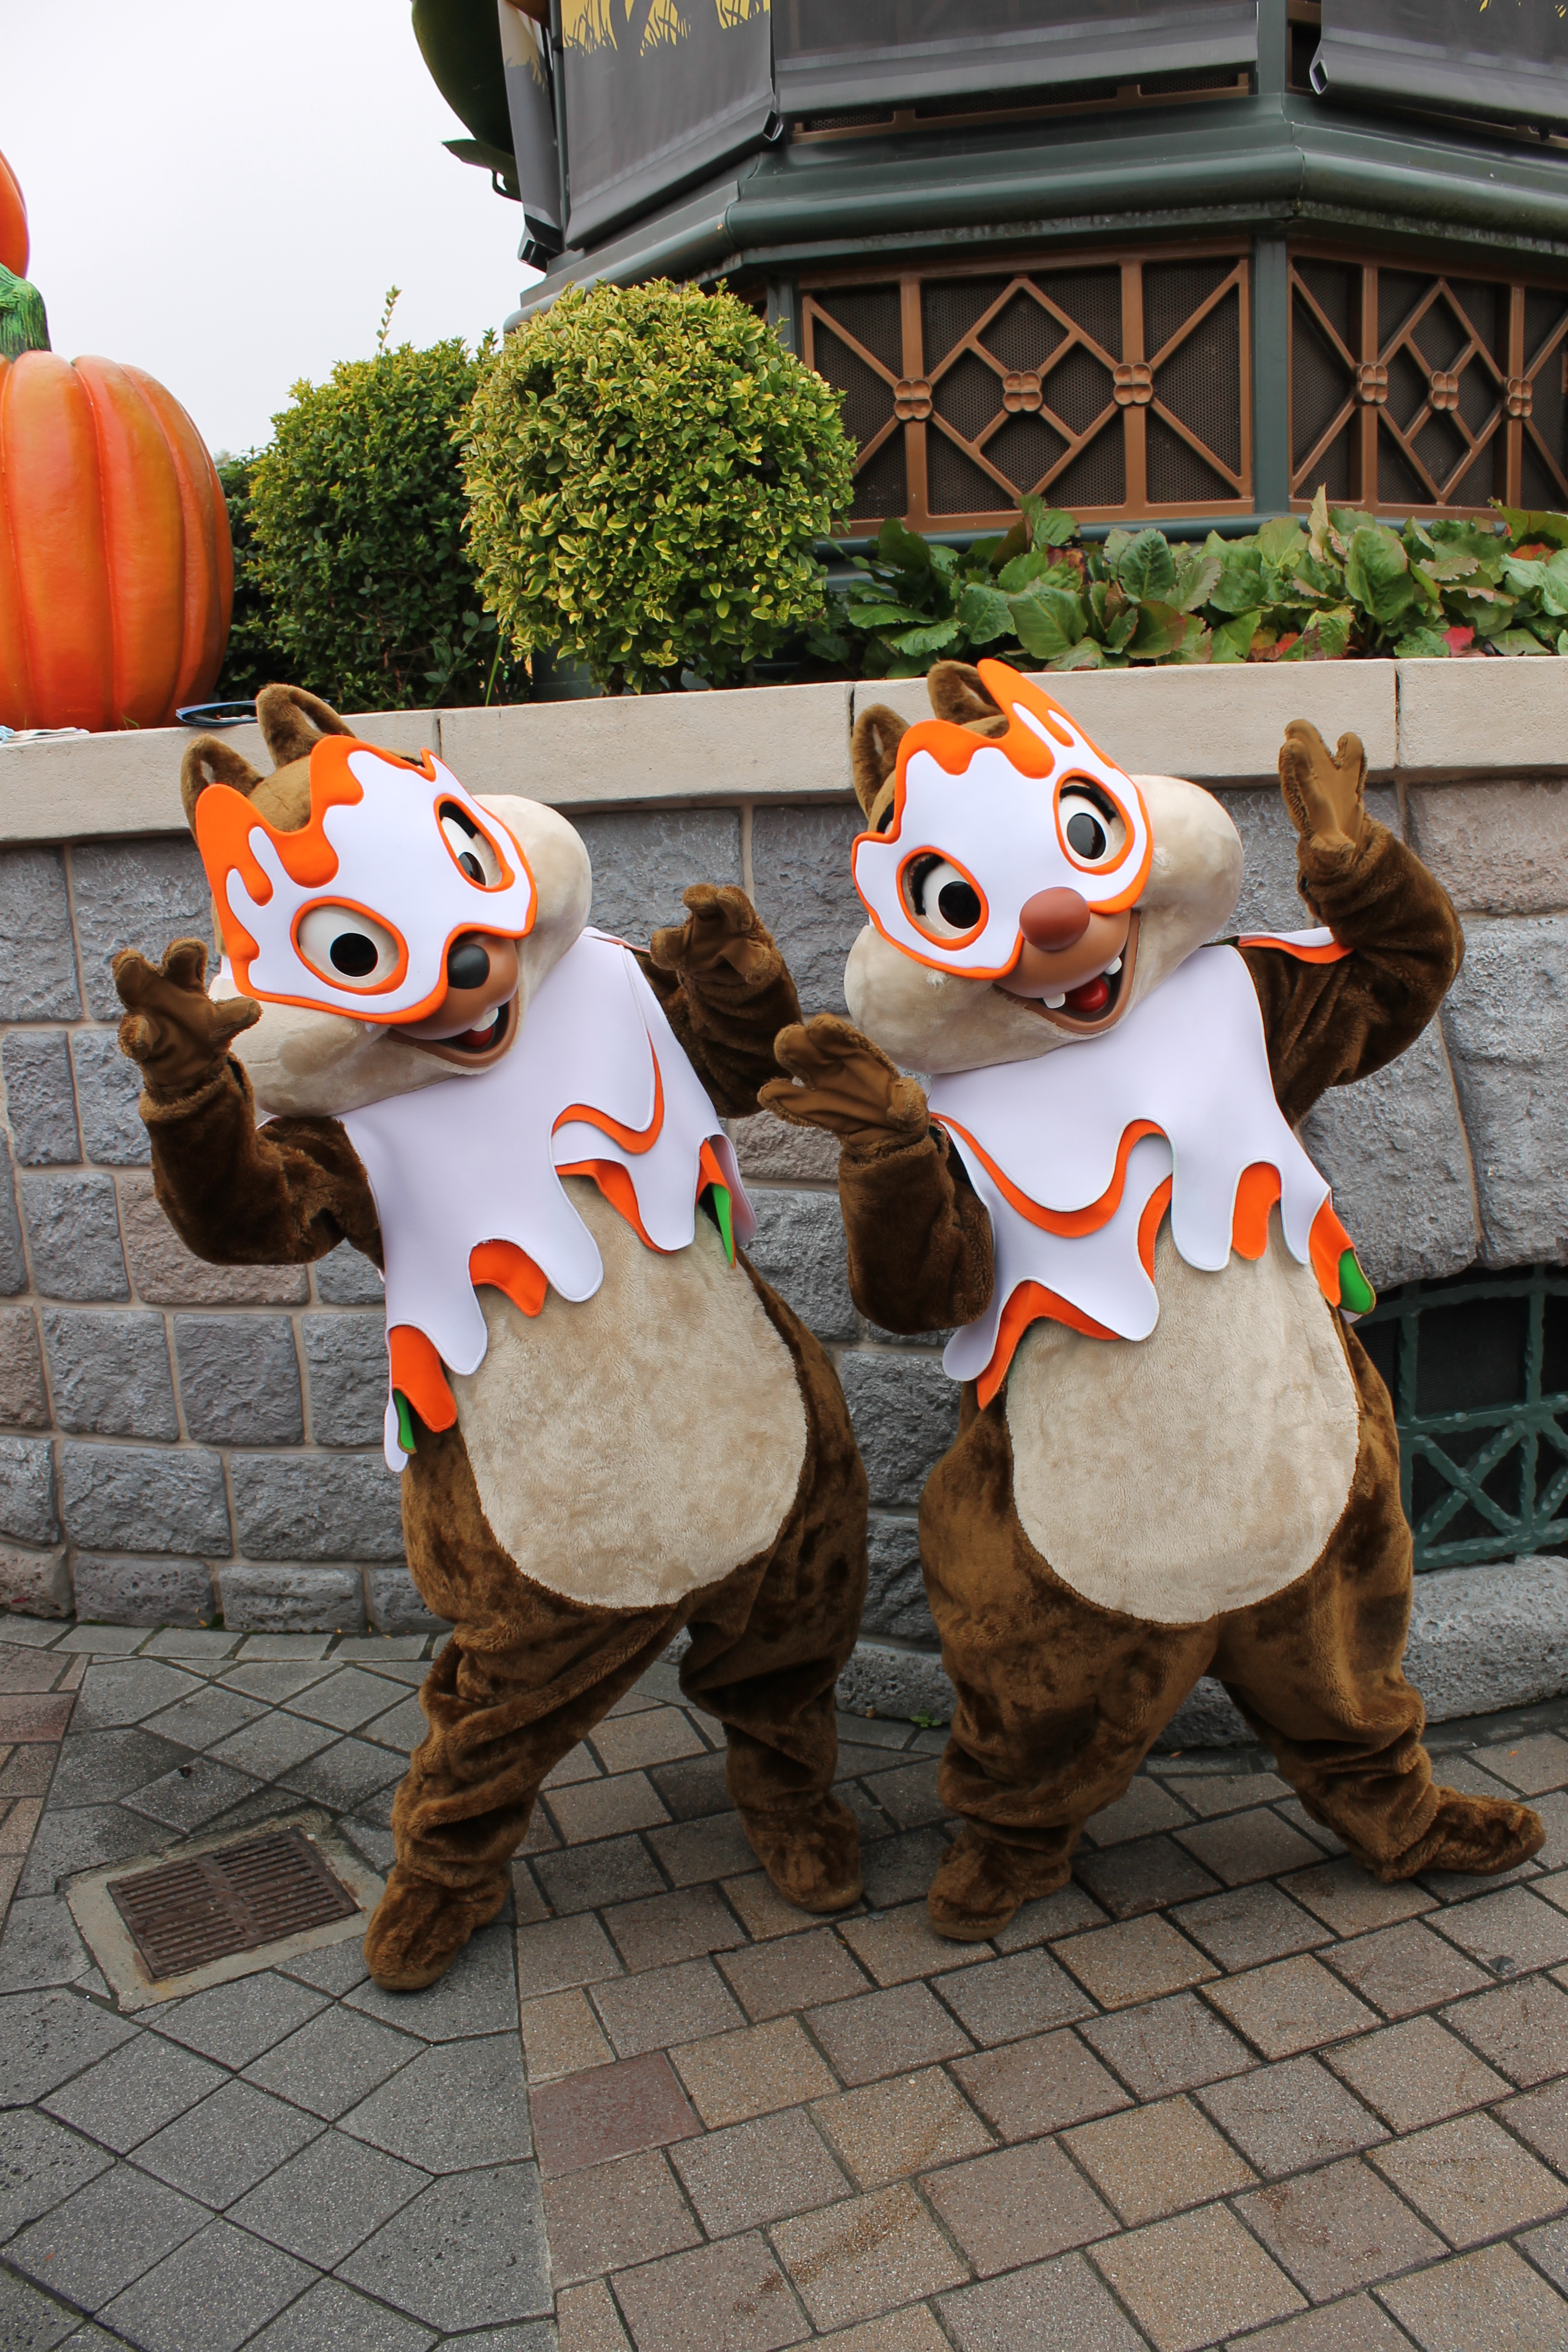 These costumes were used during the Halloween Season 2011 and 2012. They wore them in a Halloween show and after each show they did a short meet'n'greet with guests.